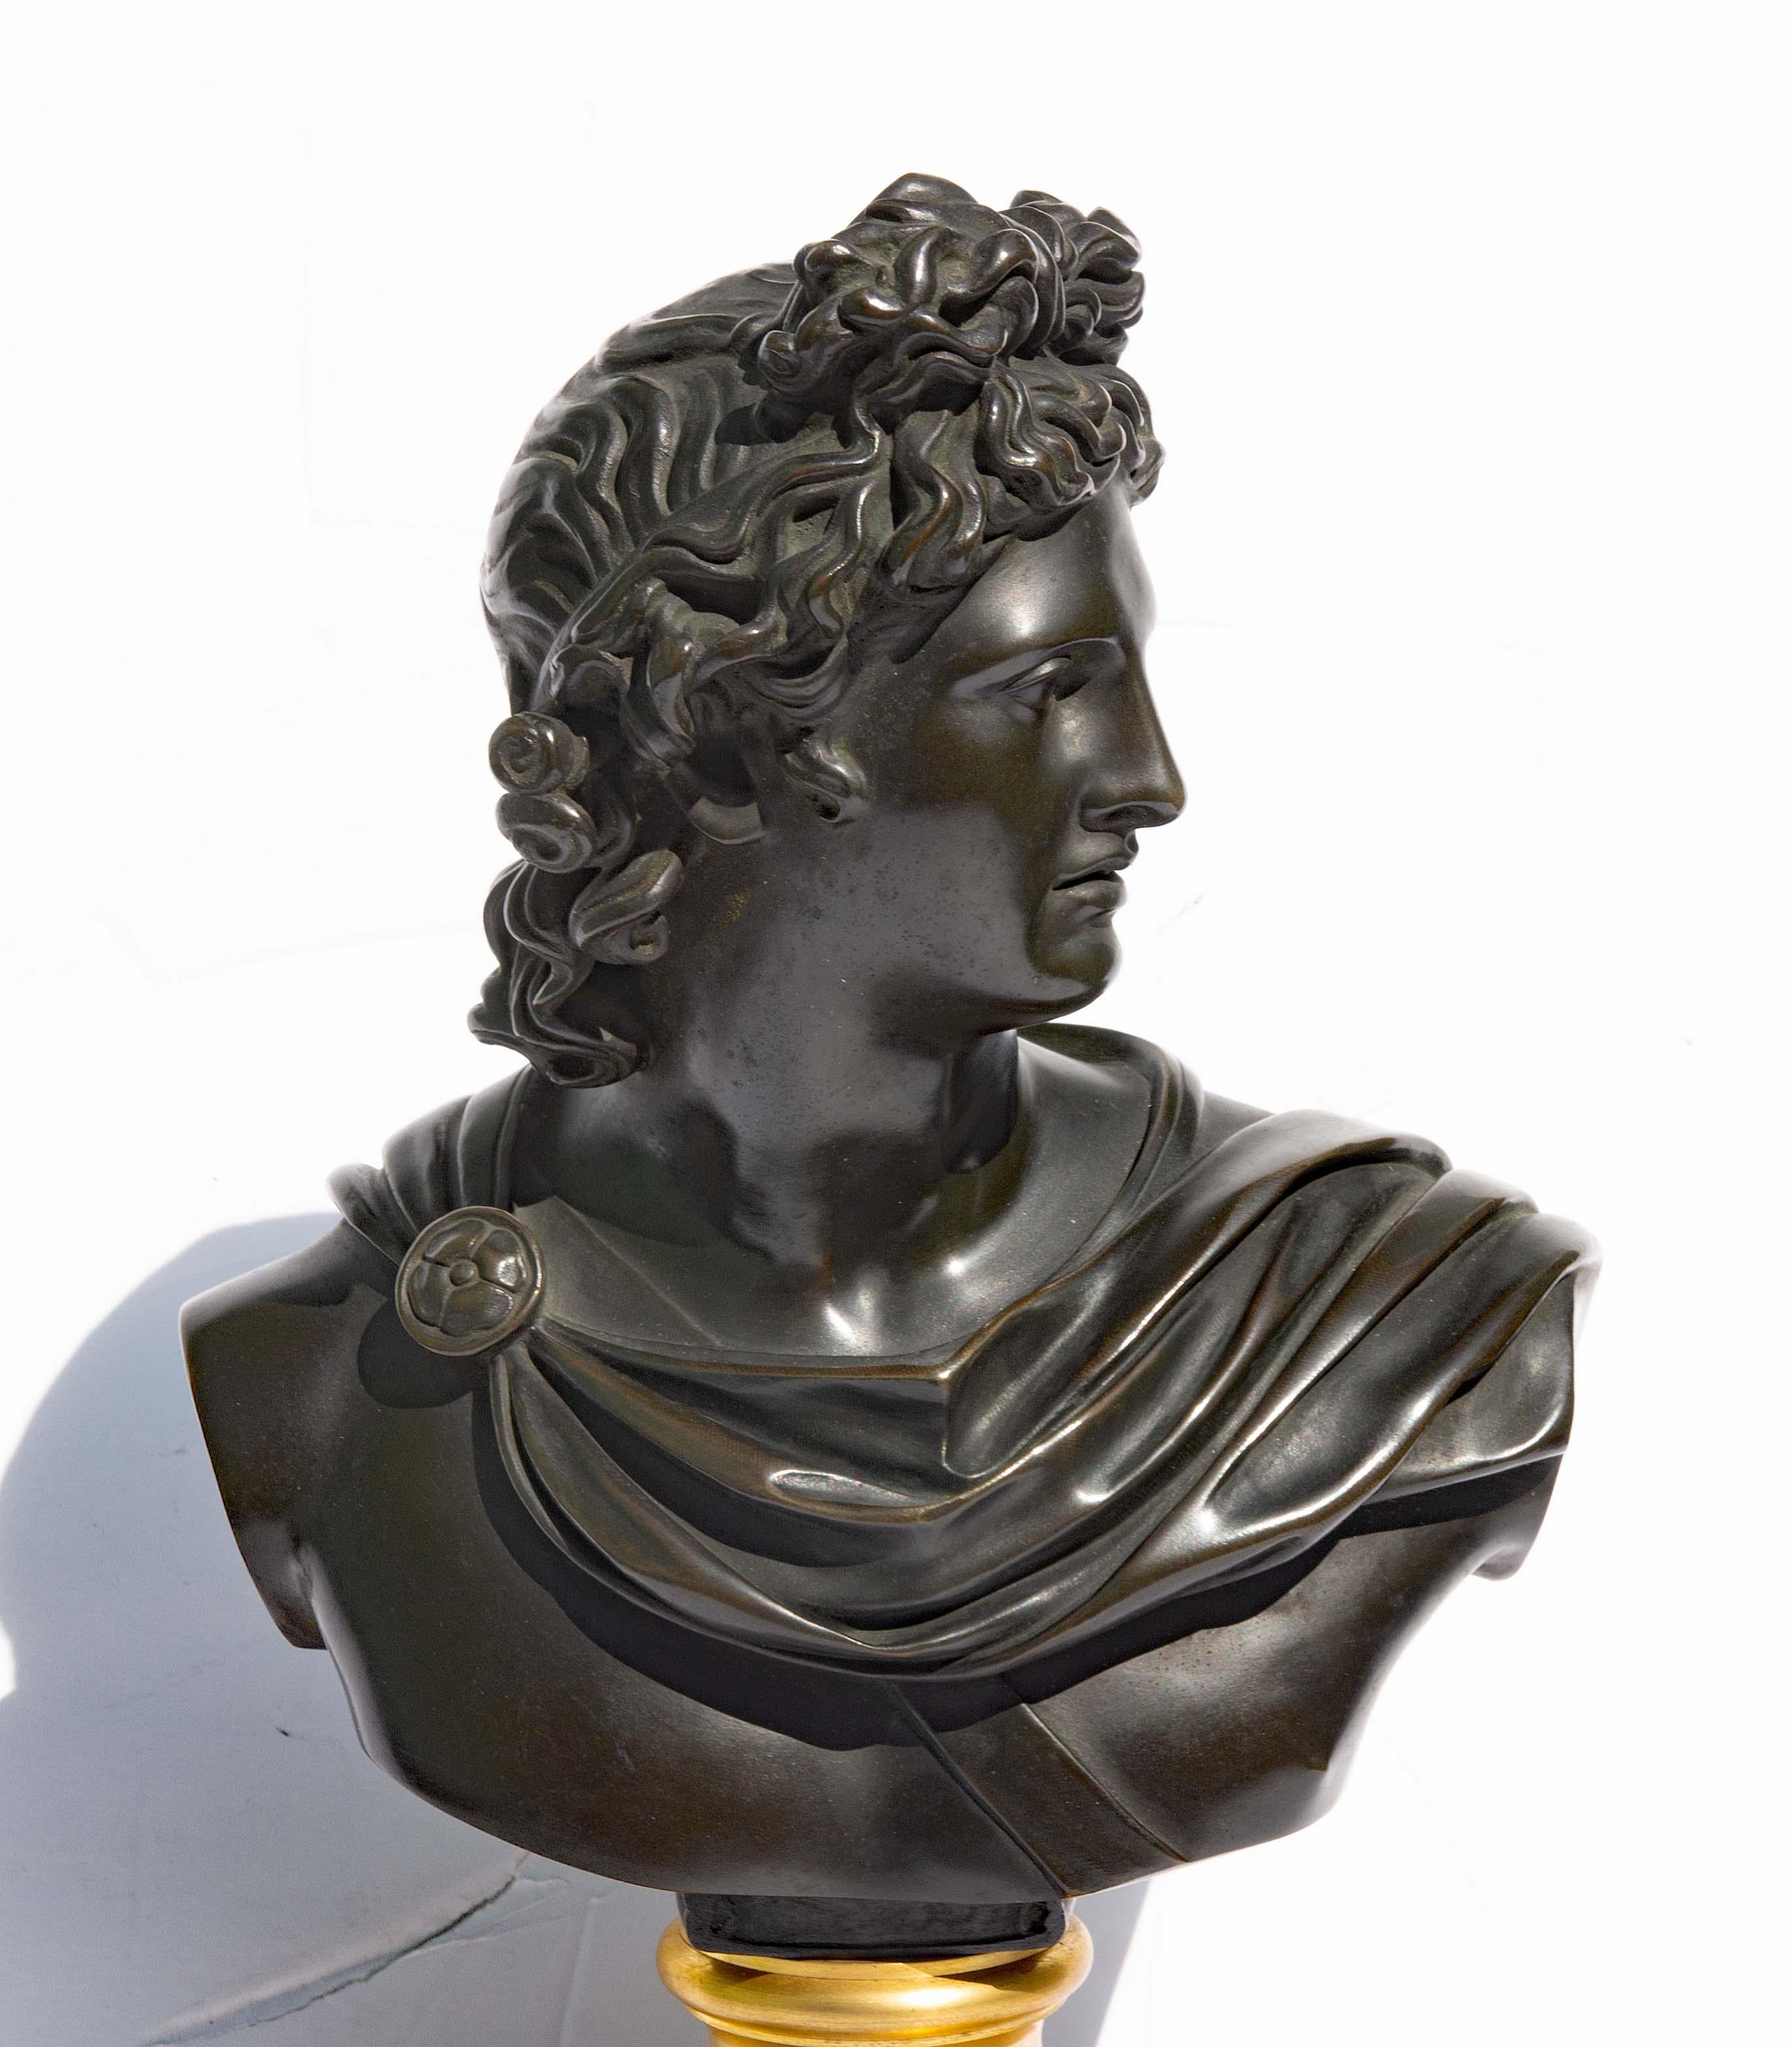 Superb 19th century bronze and gilt bronze bust of the god Belvedere Apollo, circa 1850. This wonderful Grand Tour bust is a marvel of refined beauty and elegance, crafted with richly patinated bronze-mounted on a gilt bronze socle and rouge marble